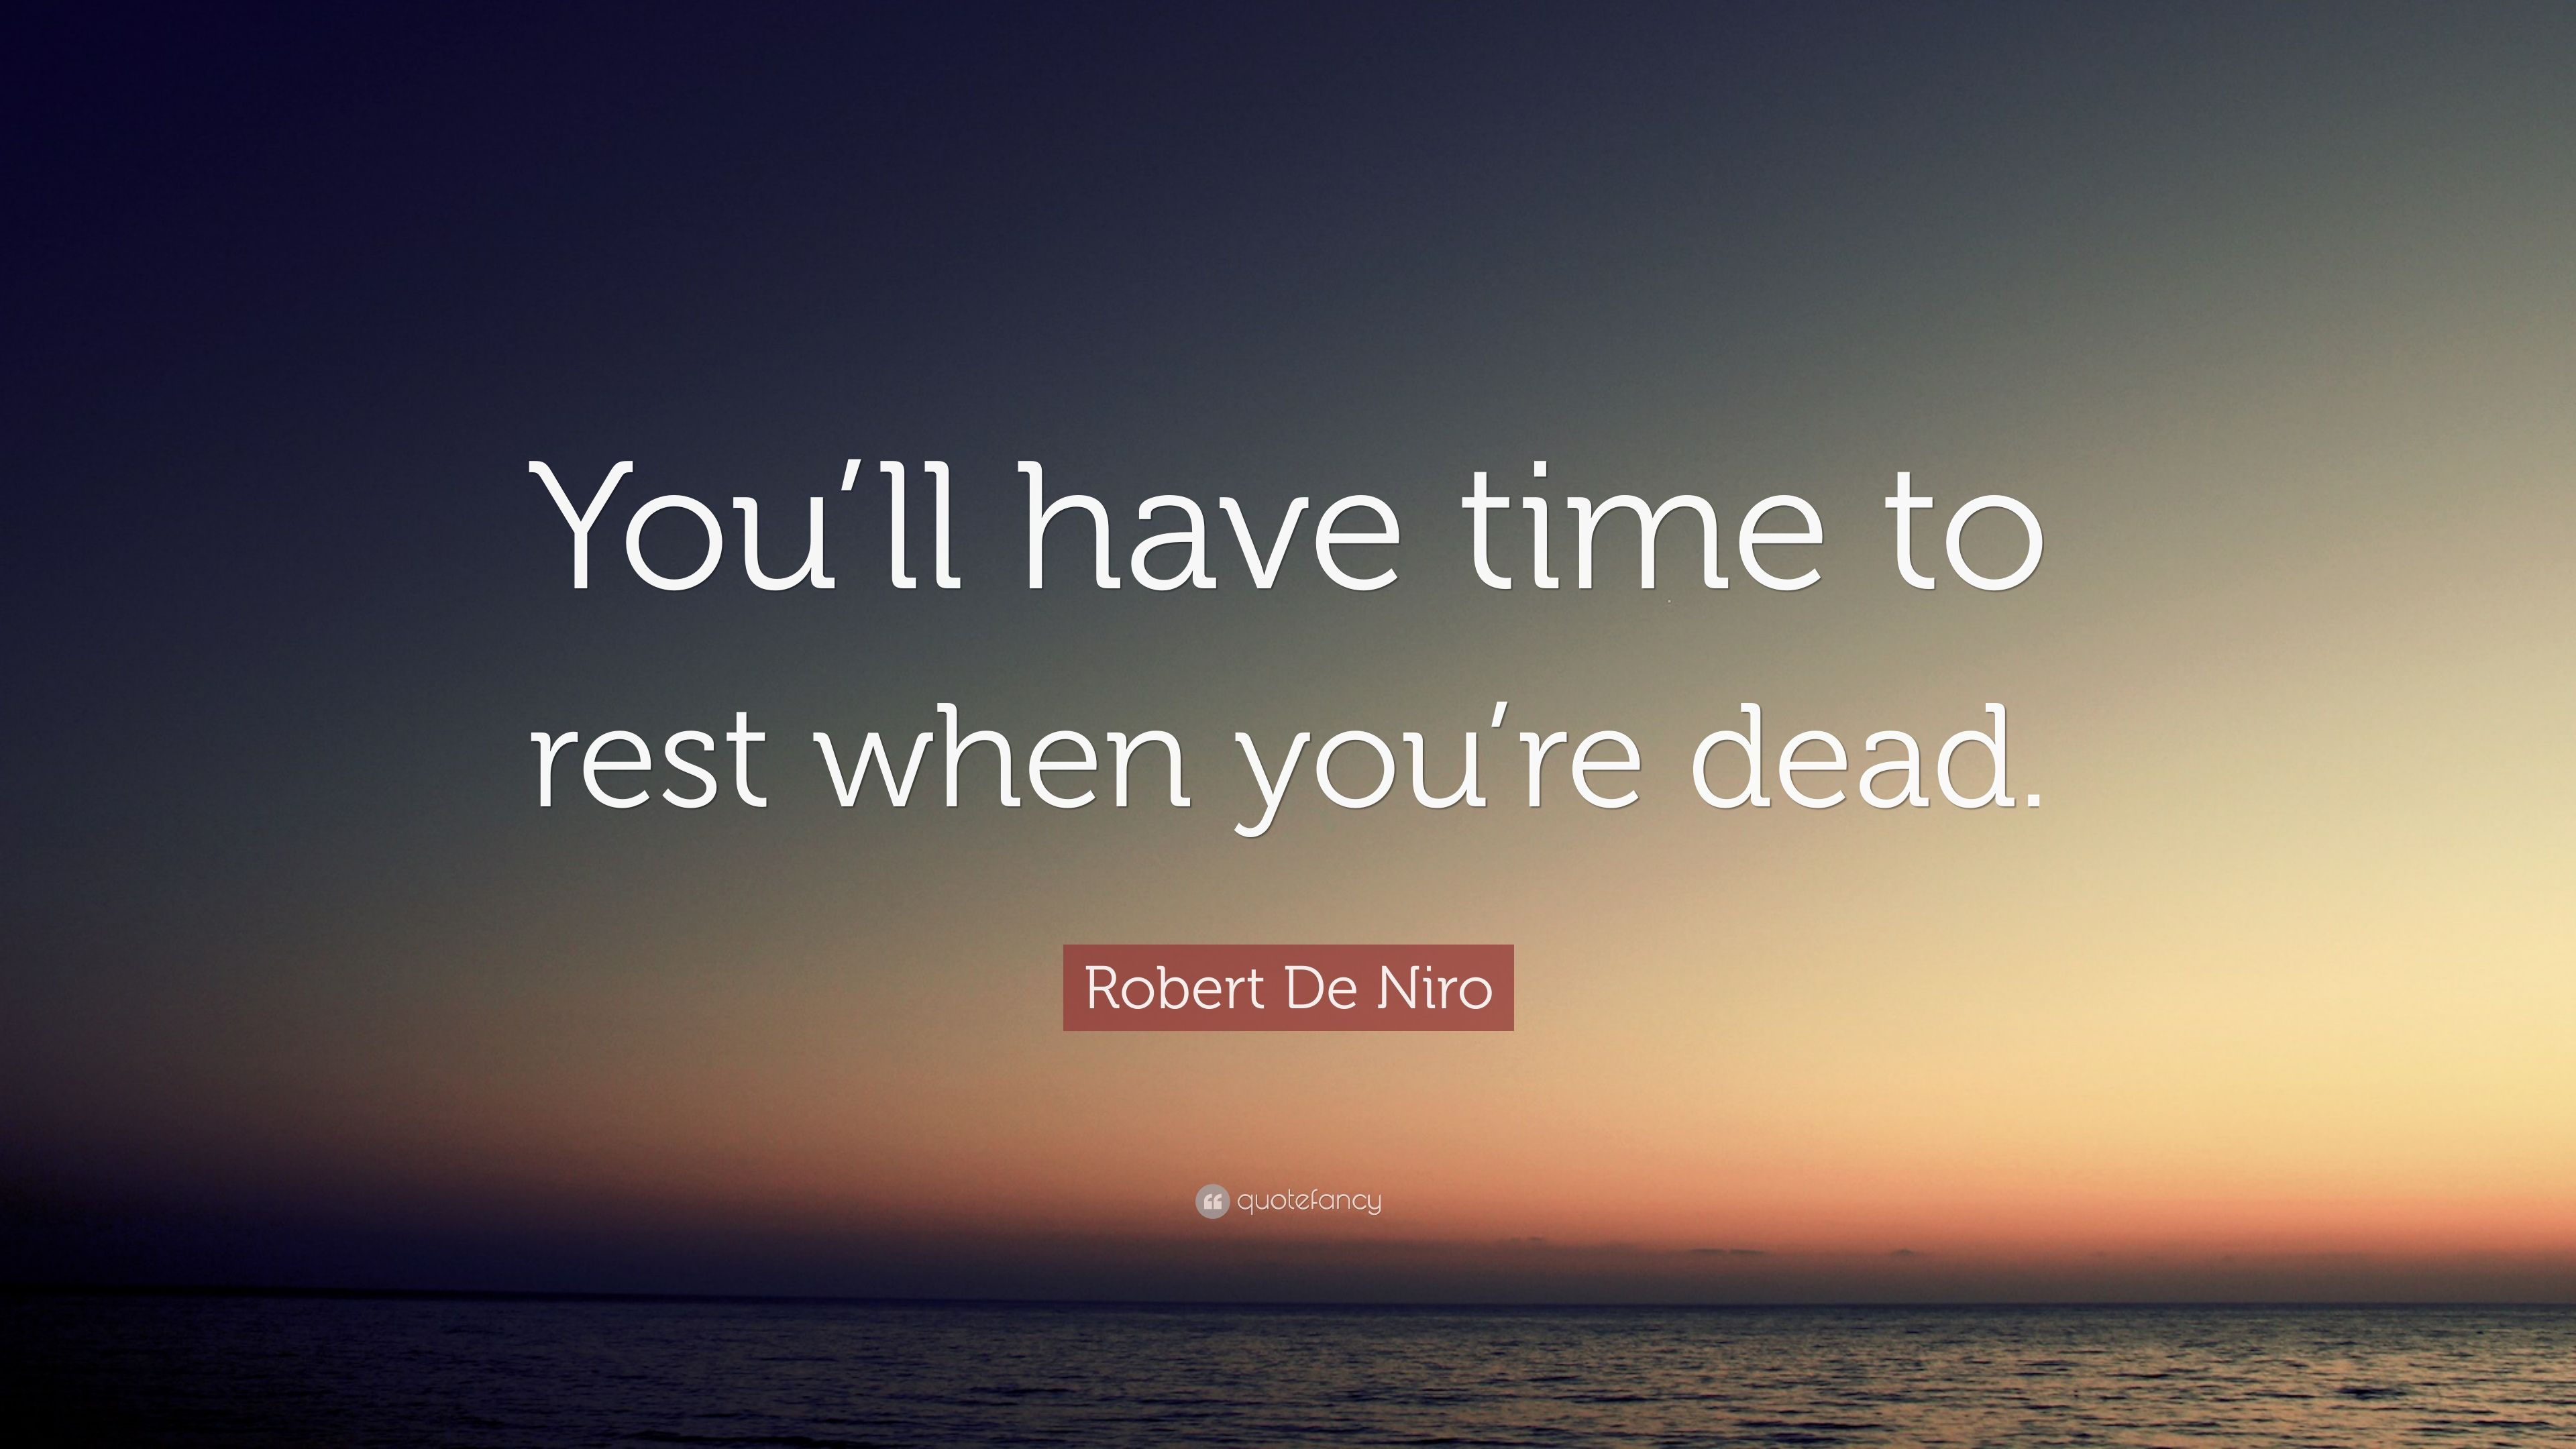 Robert De Niro Quote: “You'll have time to rest when you're dead.” (12 wallpaper)